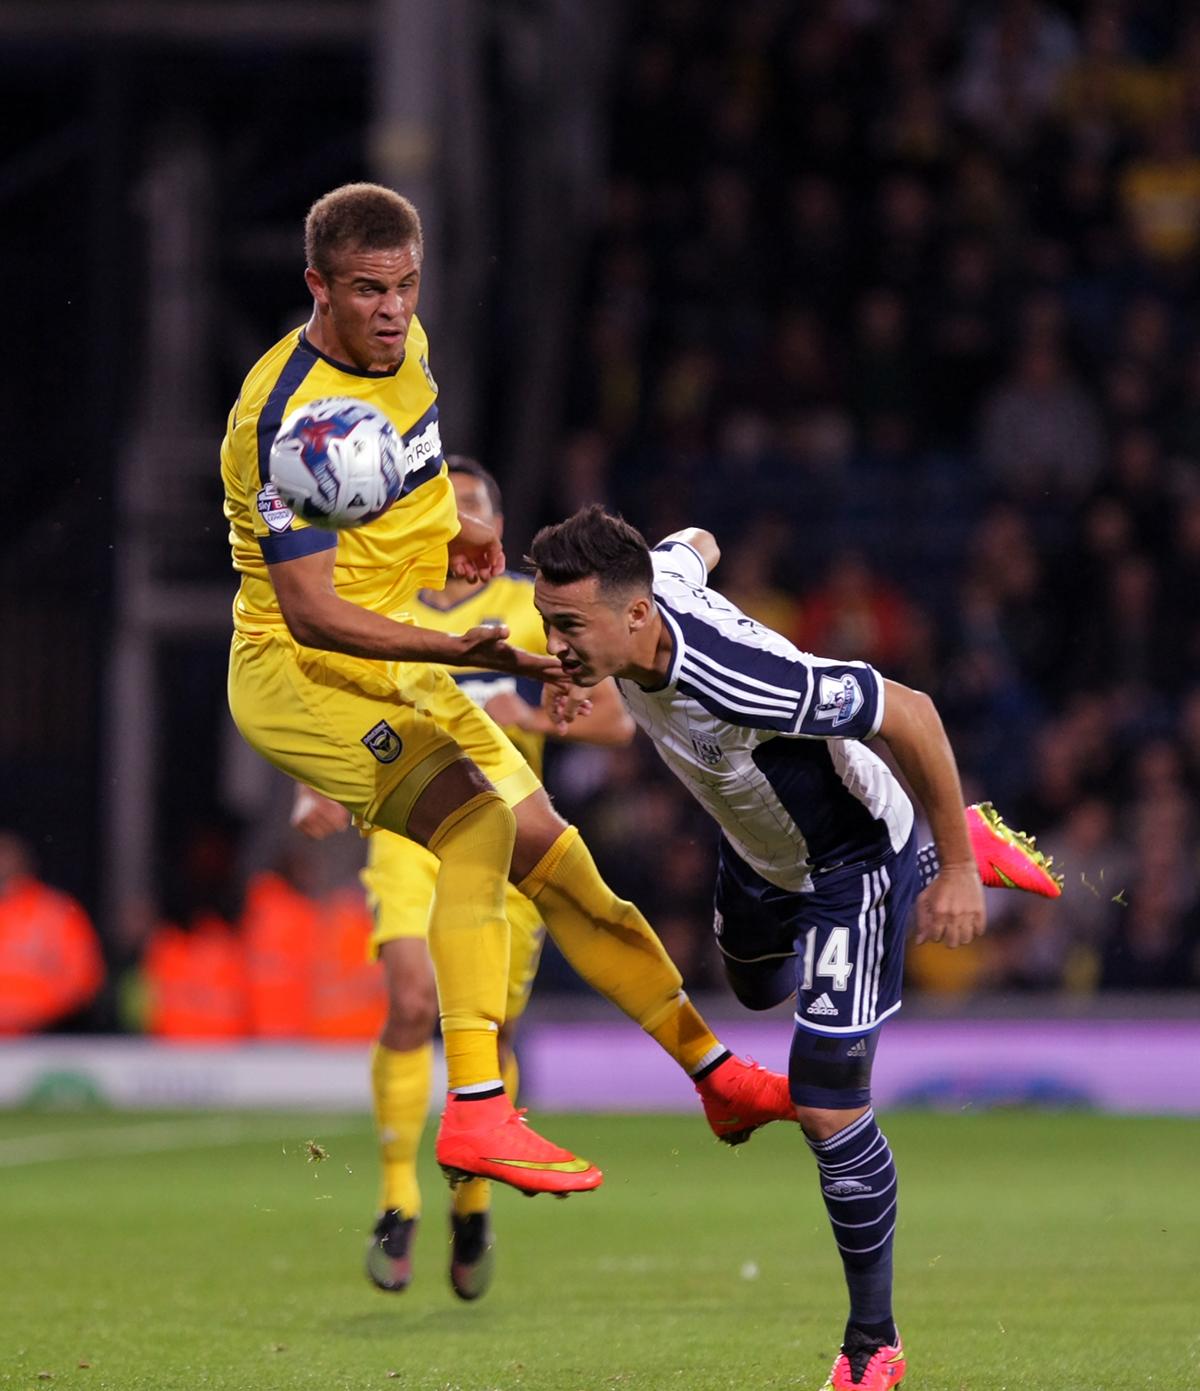 West Bromwich Albion v Oxford United